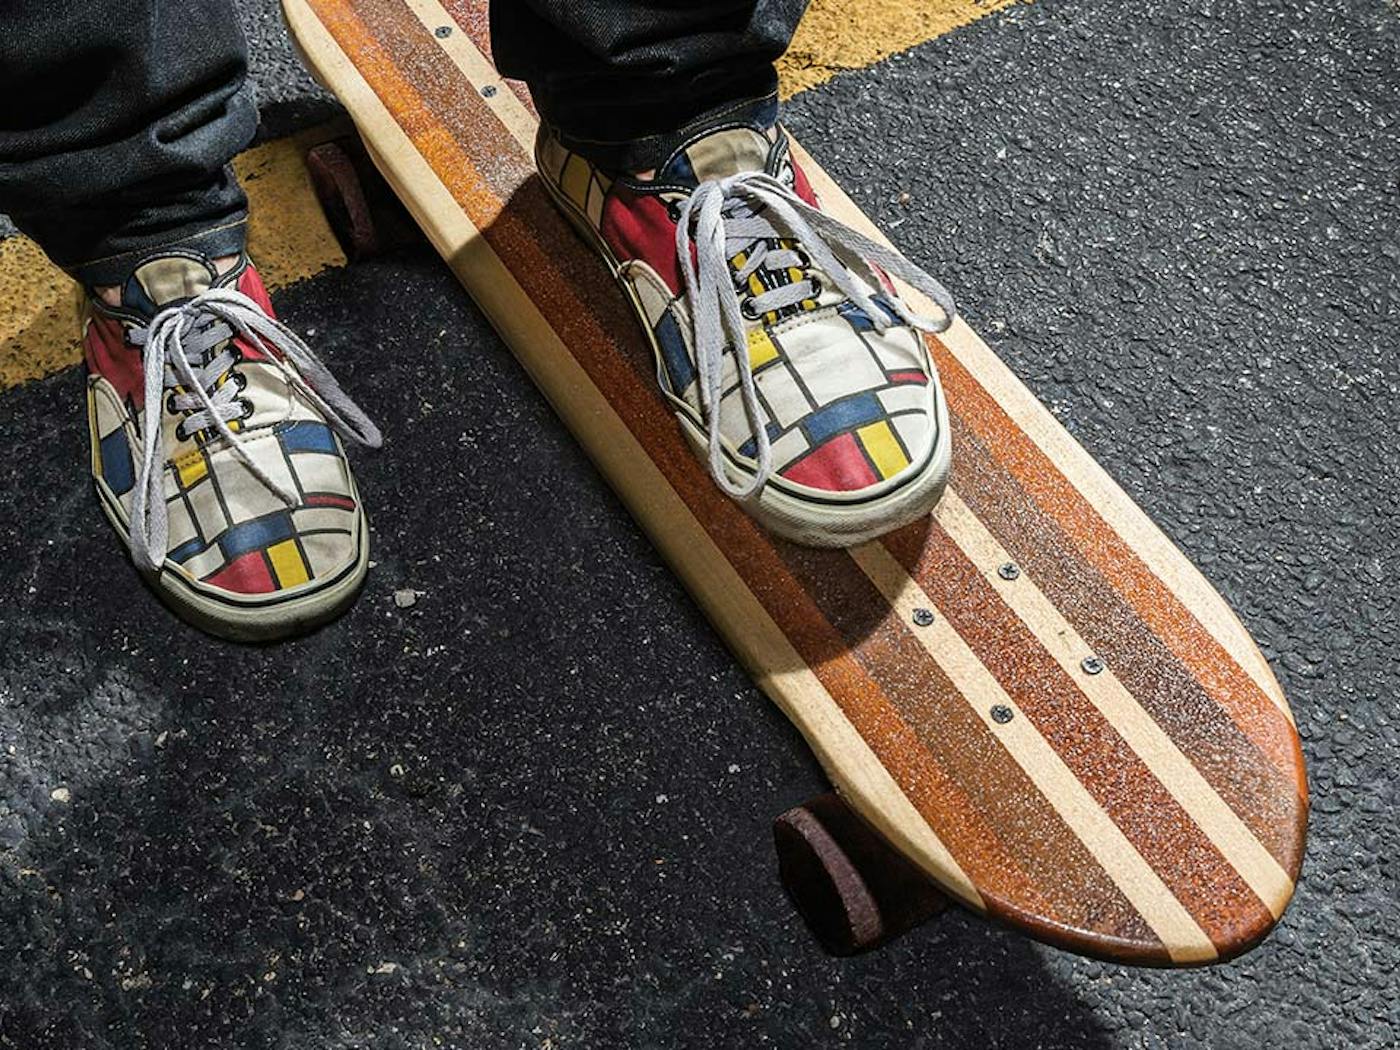 Side projects. Tello скейтборд Side. Fortune Skateboards. All Skaters Дзепка. This Skateboard Shoe was designed in the USA.